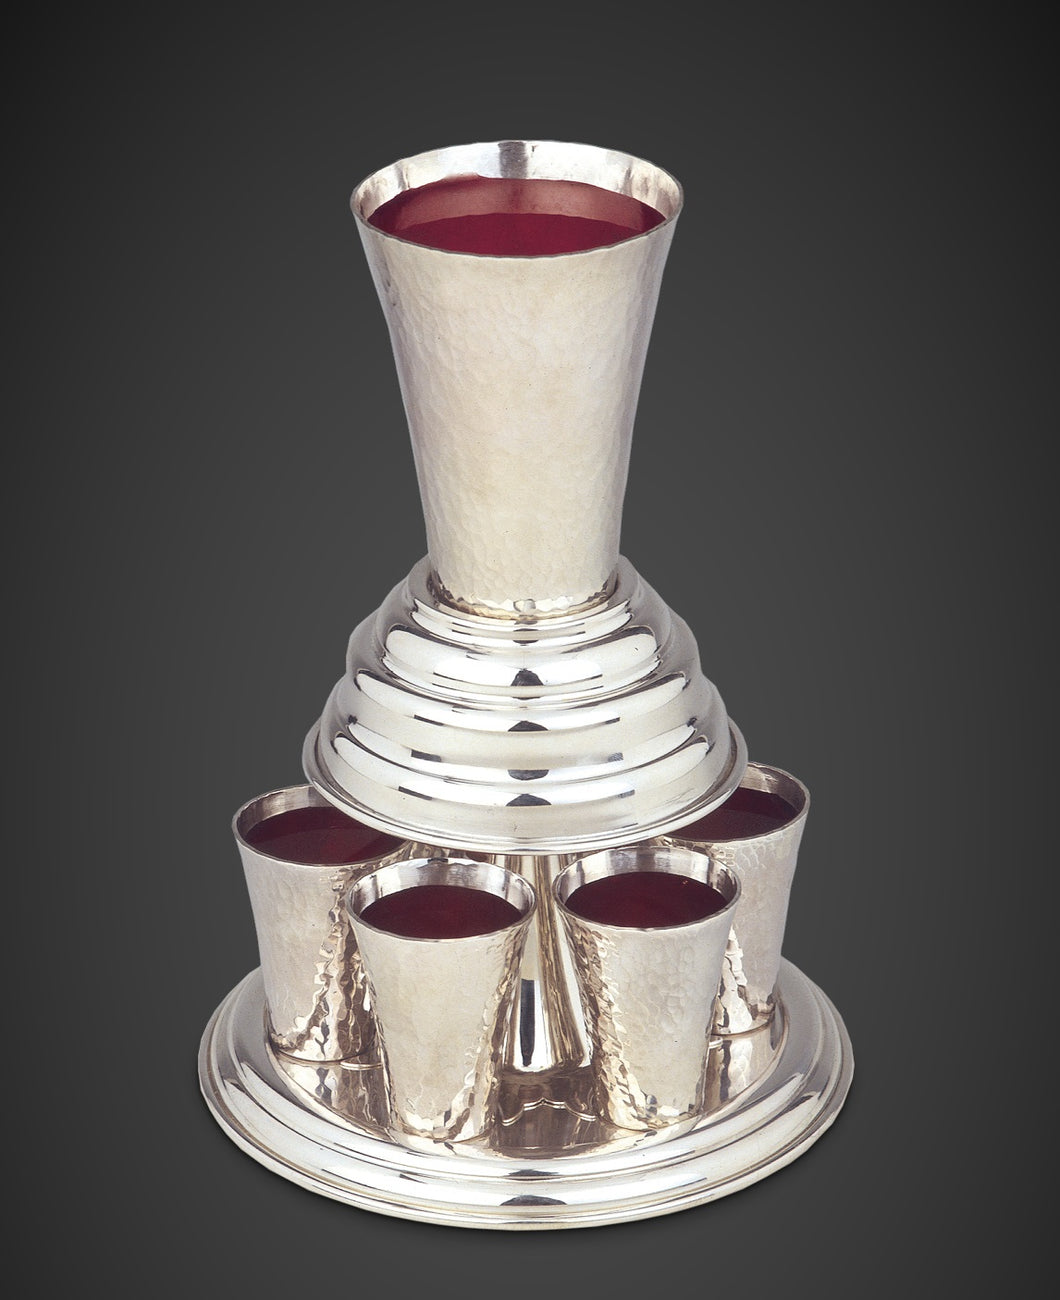 The Conical Fulfilling Cup